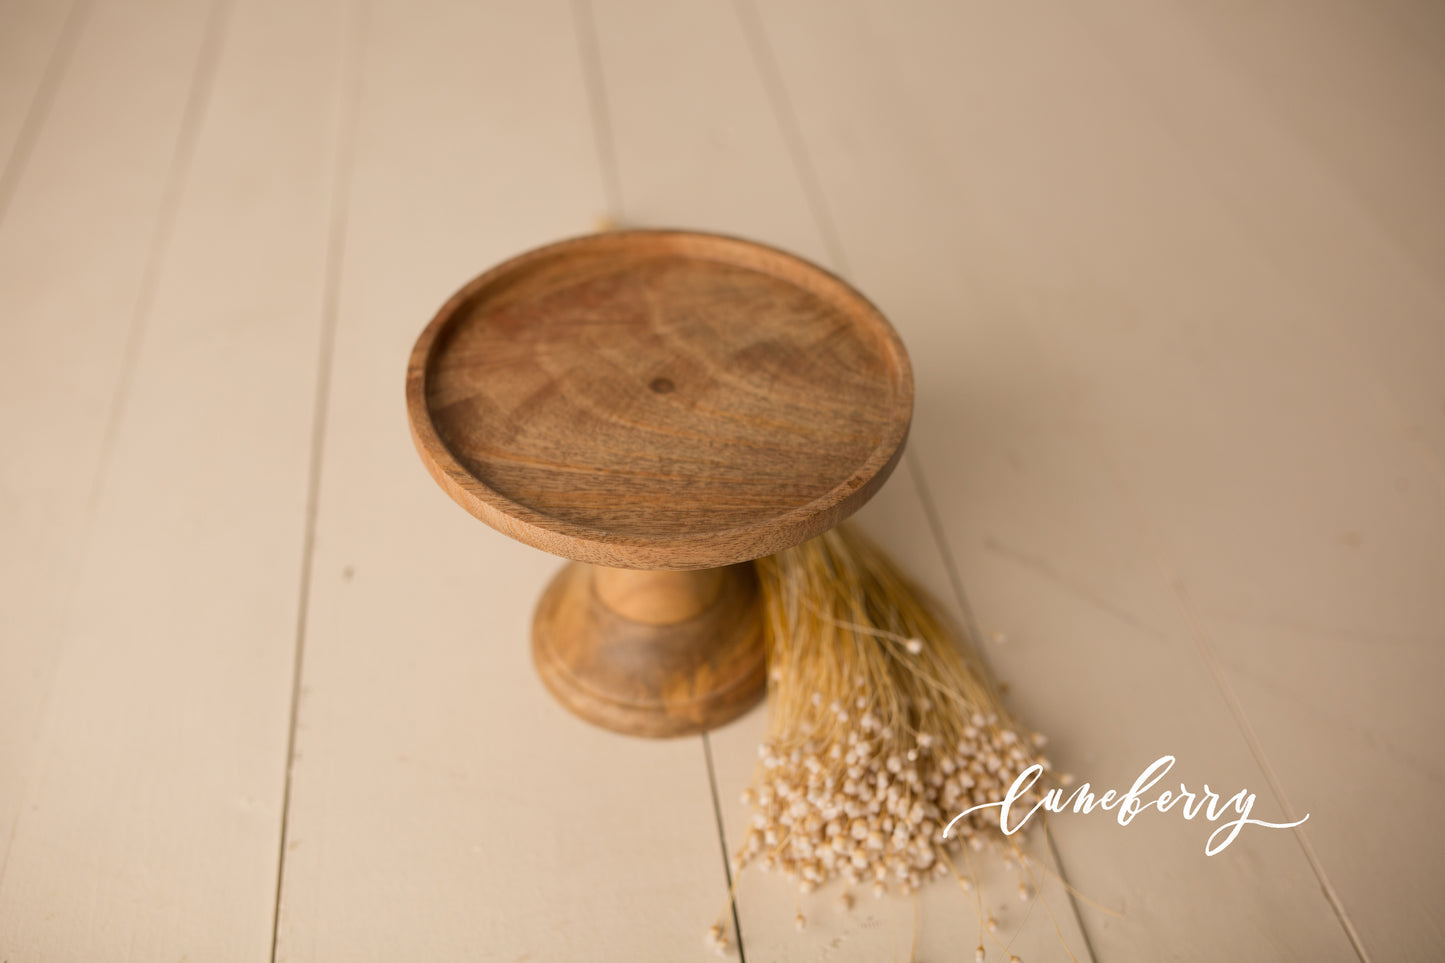 "Celebrate" Wooden Cake Stands - four finishes